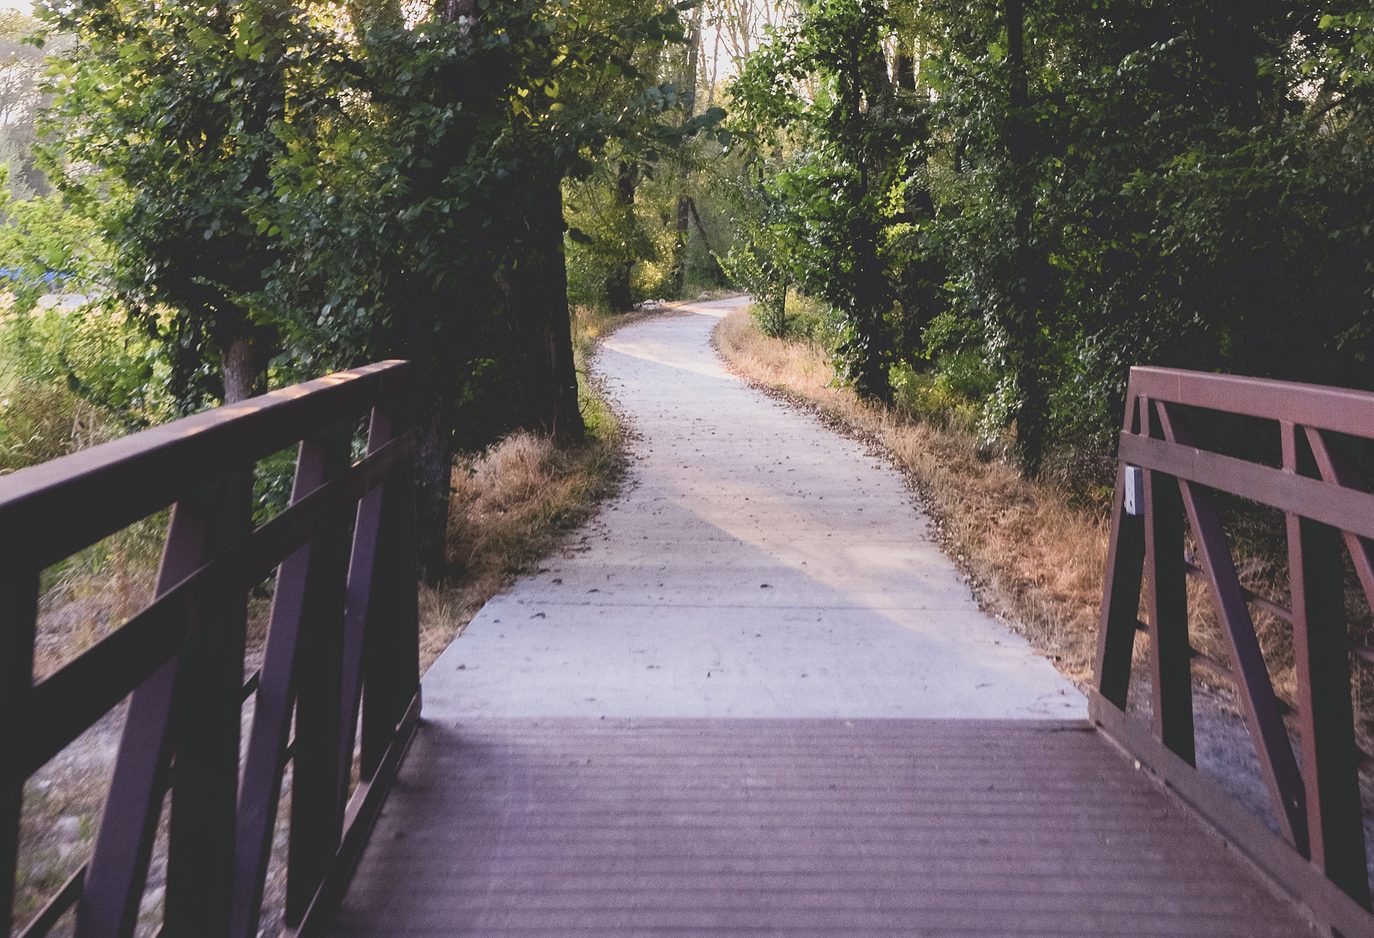 A trail crosses a bridge and leads into a forest